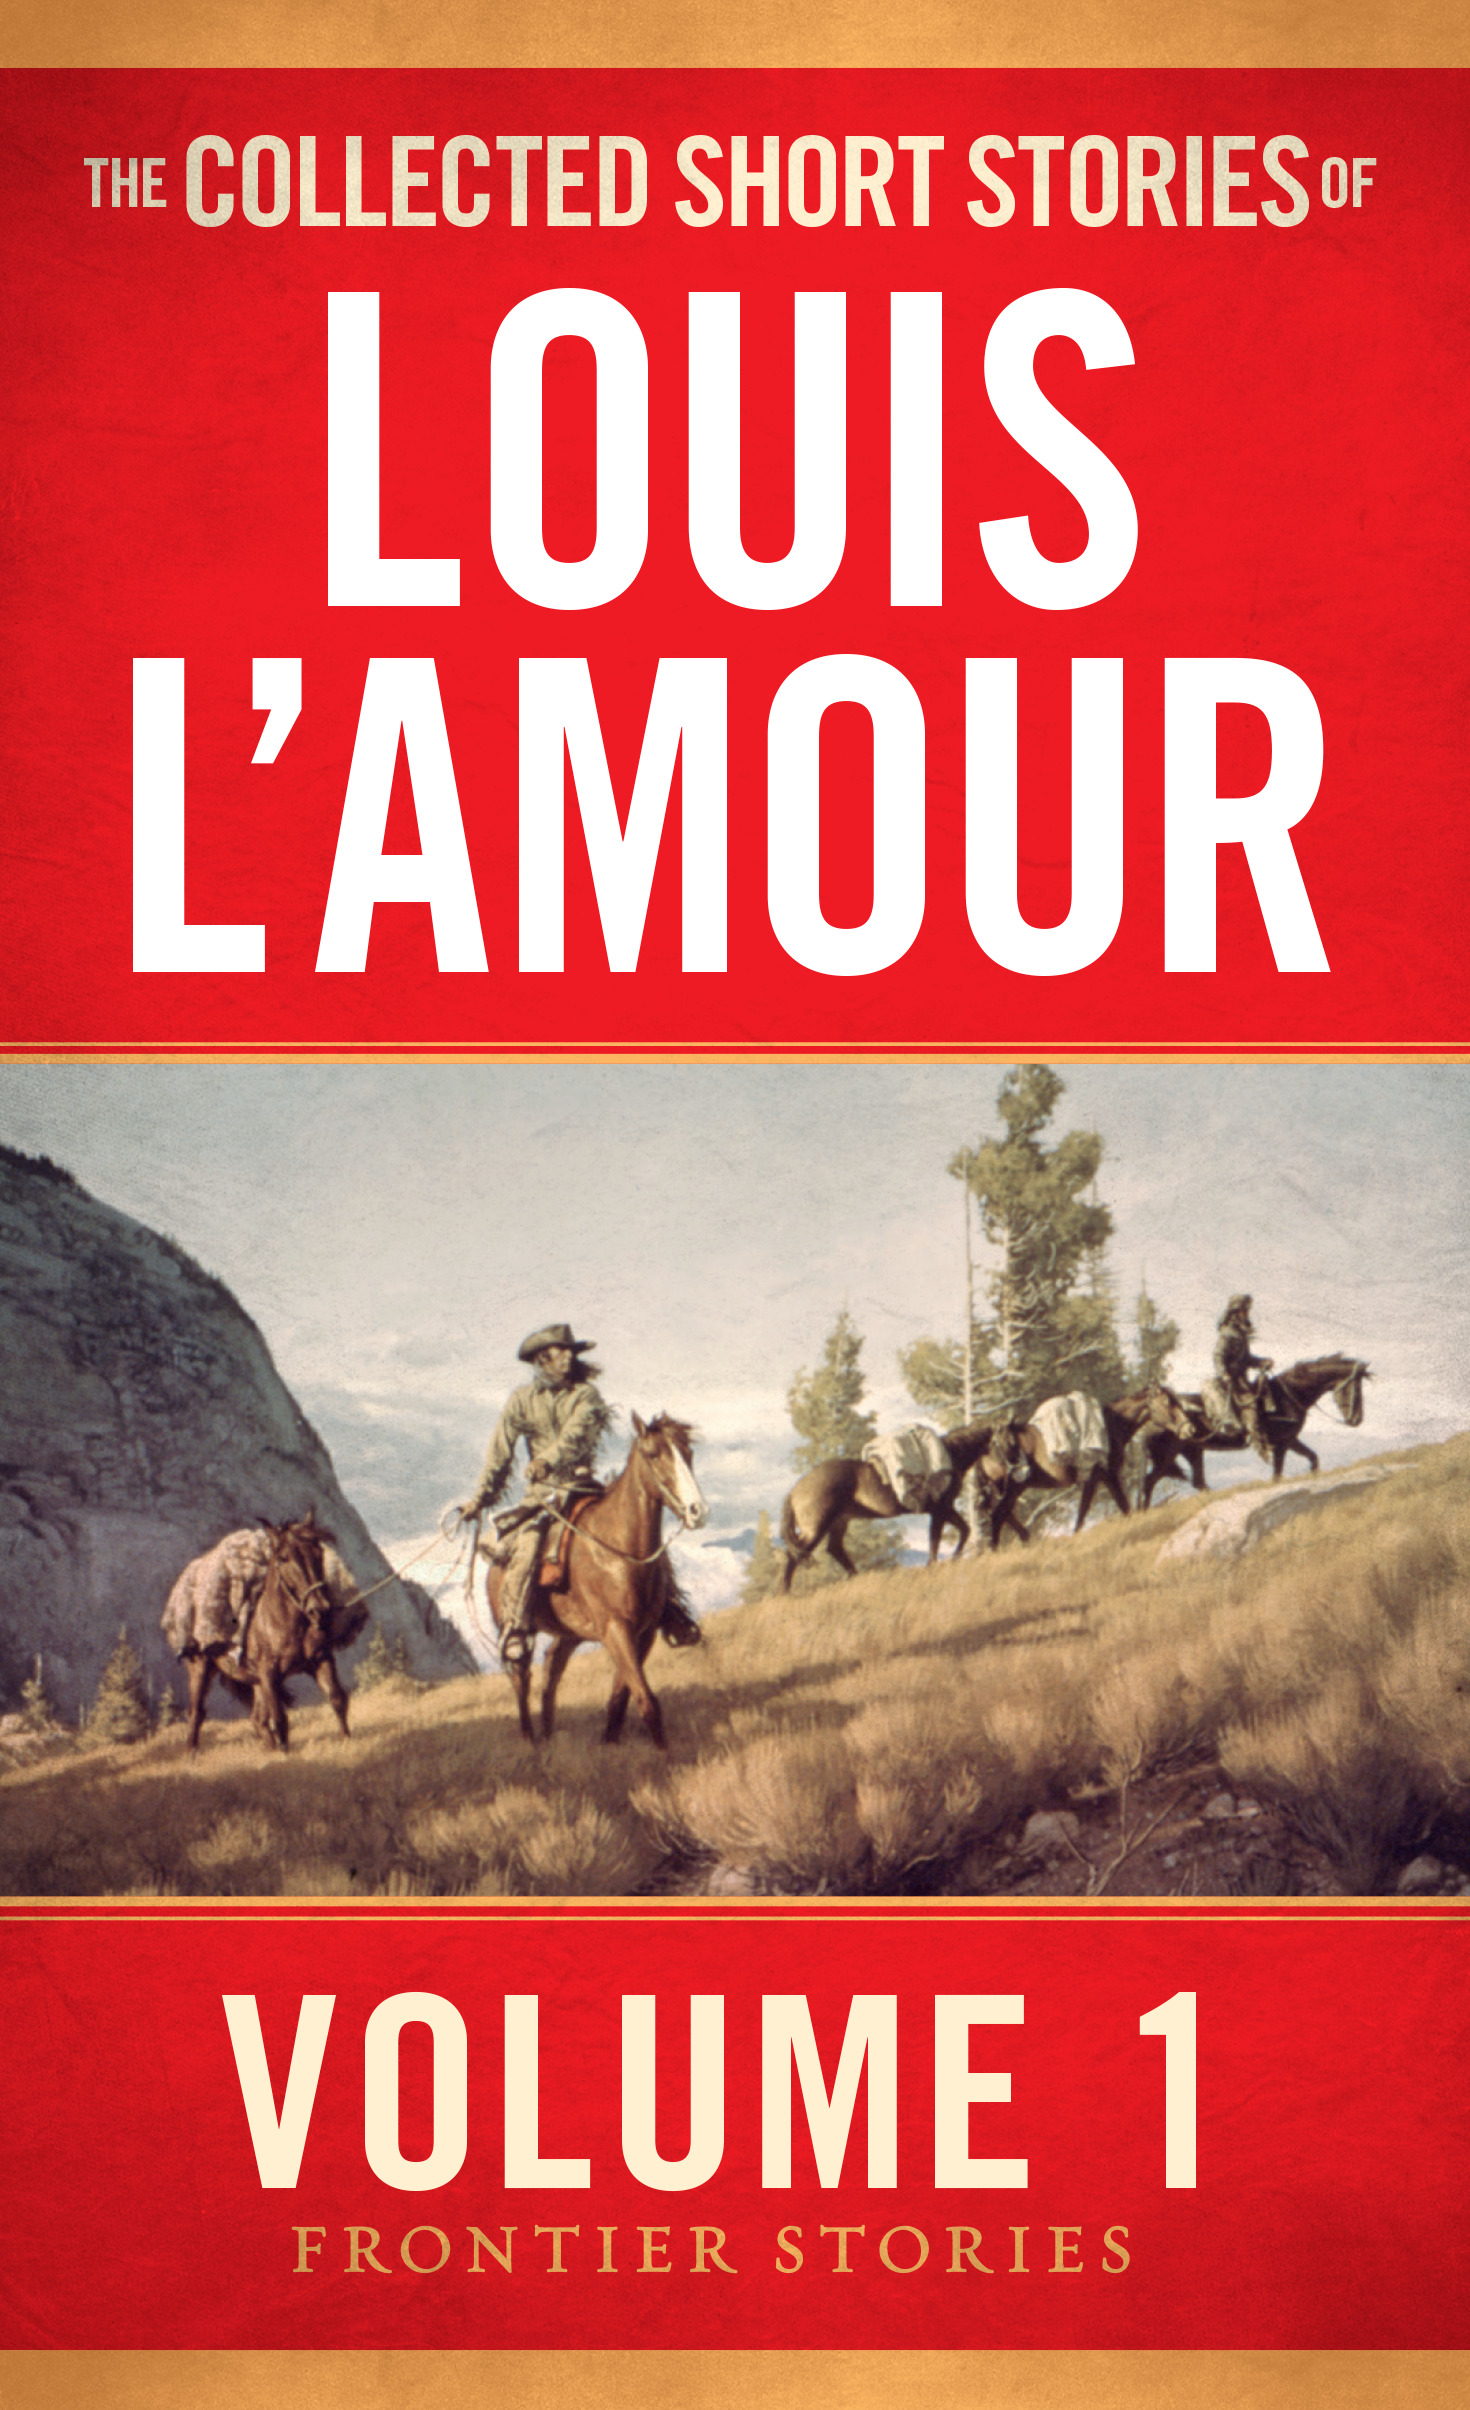 The Collected Short Stories of Louis L'Amour Volume 1